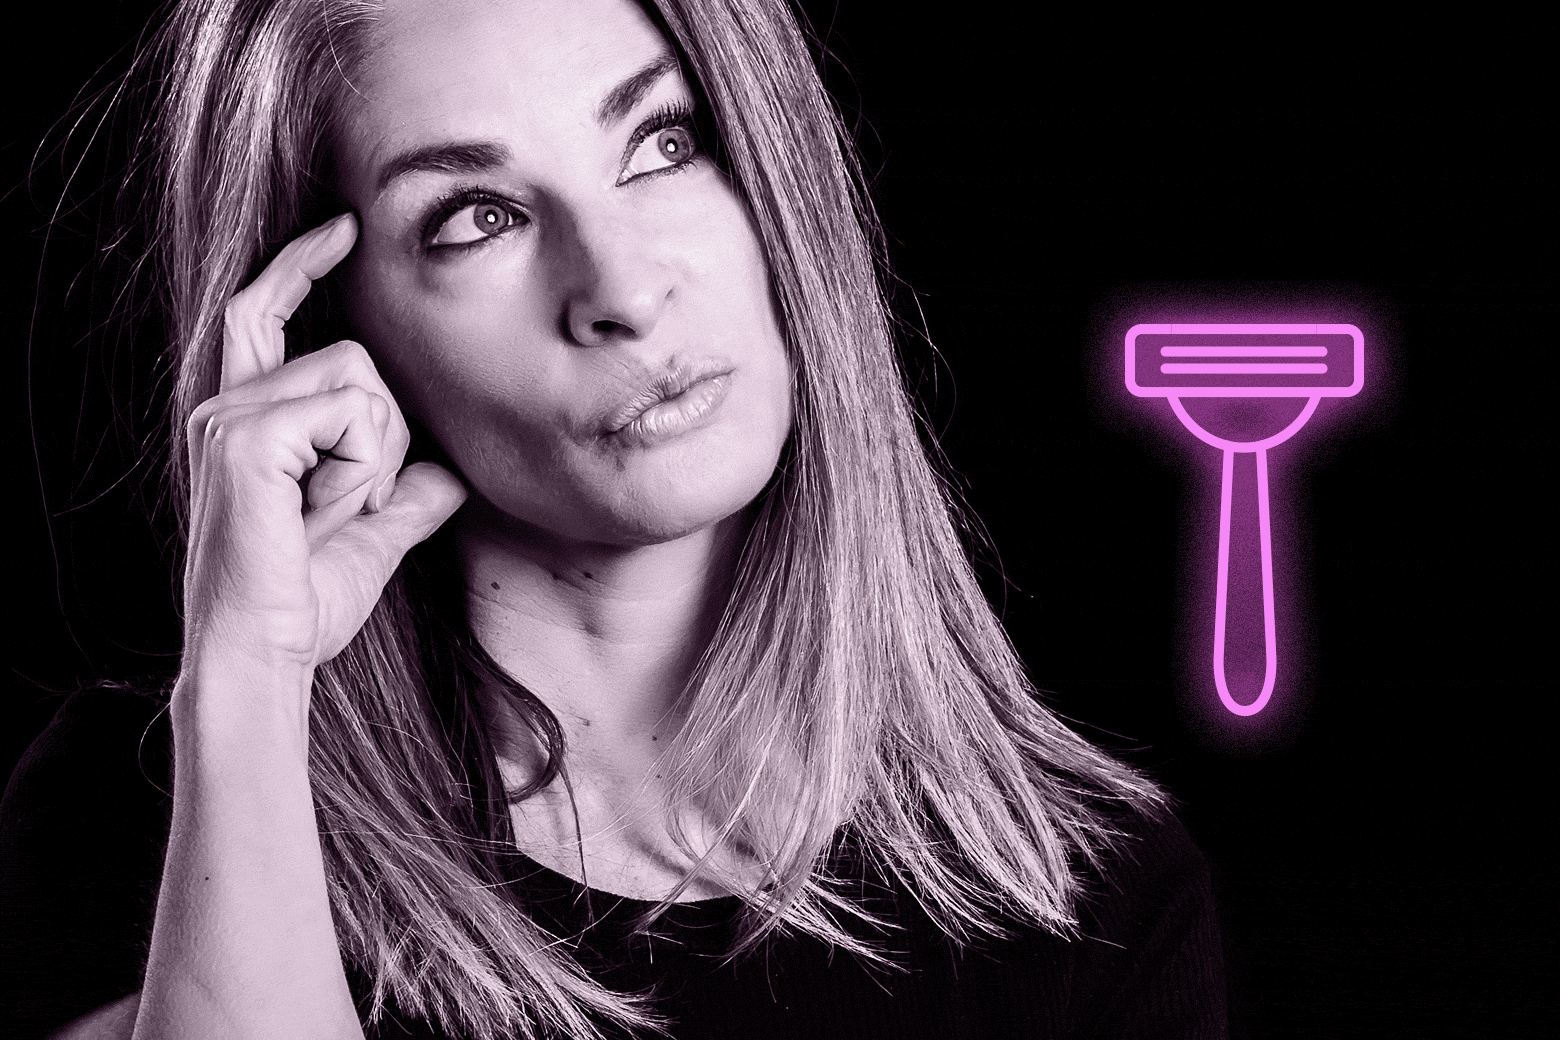 What percentage of women shave their vagina